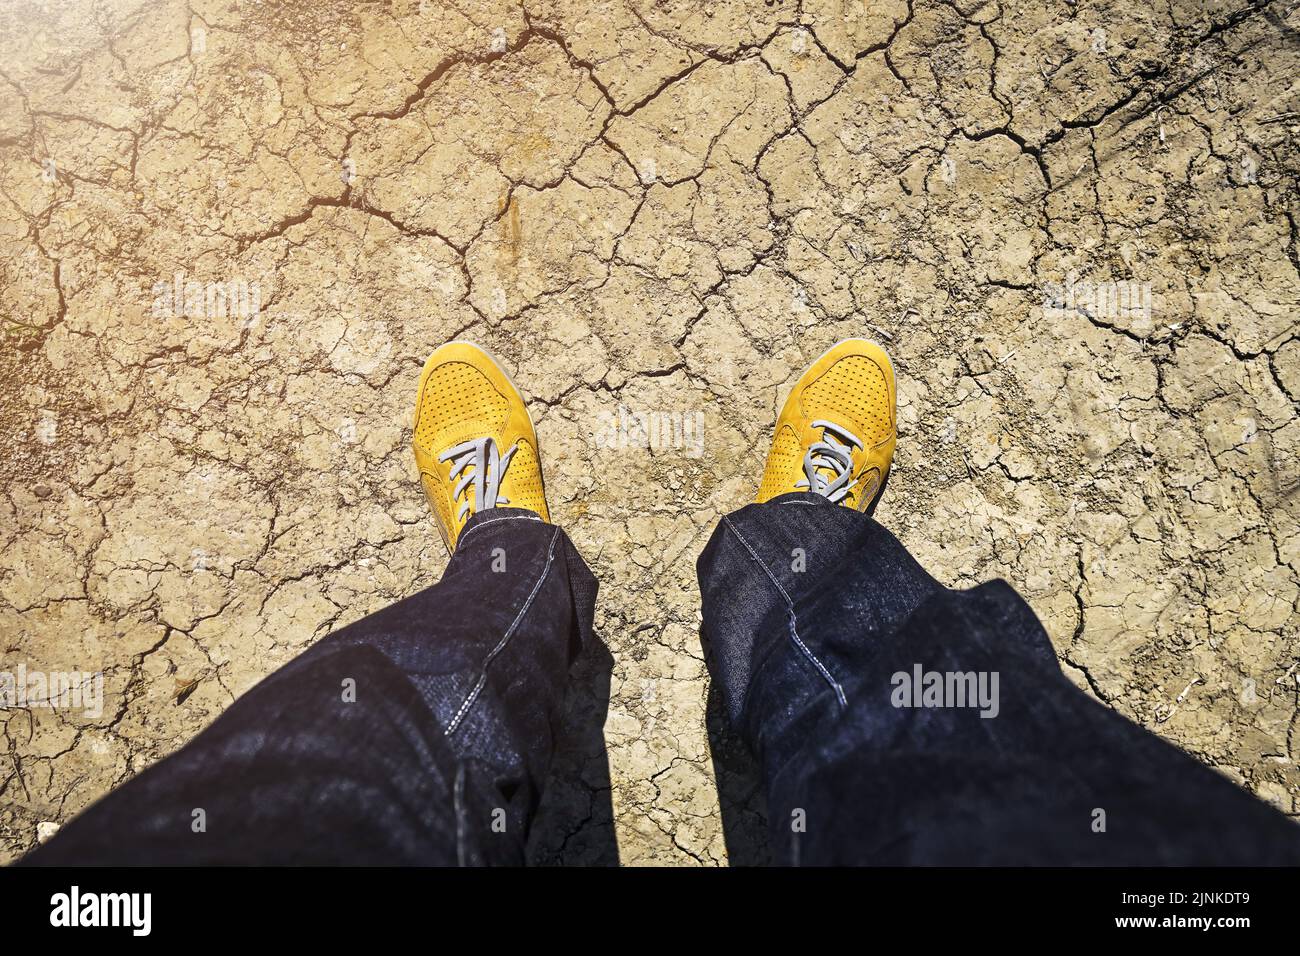 Man Standing On Dry Broken Earth Symbol Photo Climate Change Heat Wave And Drought Stock Photo